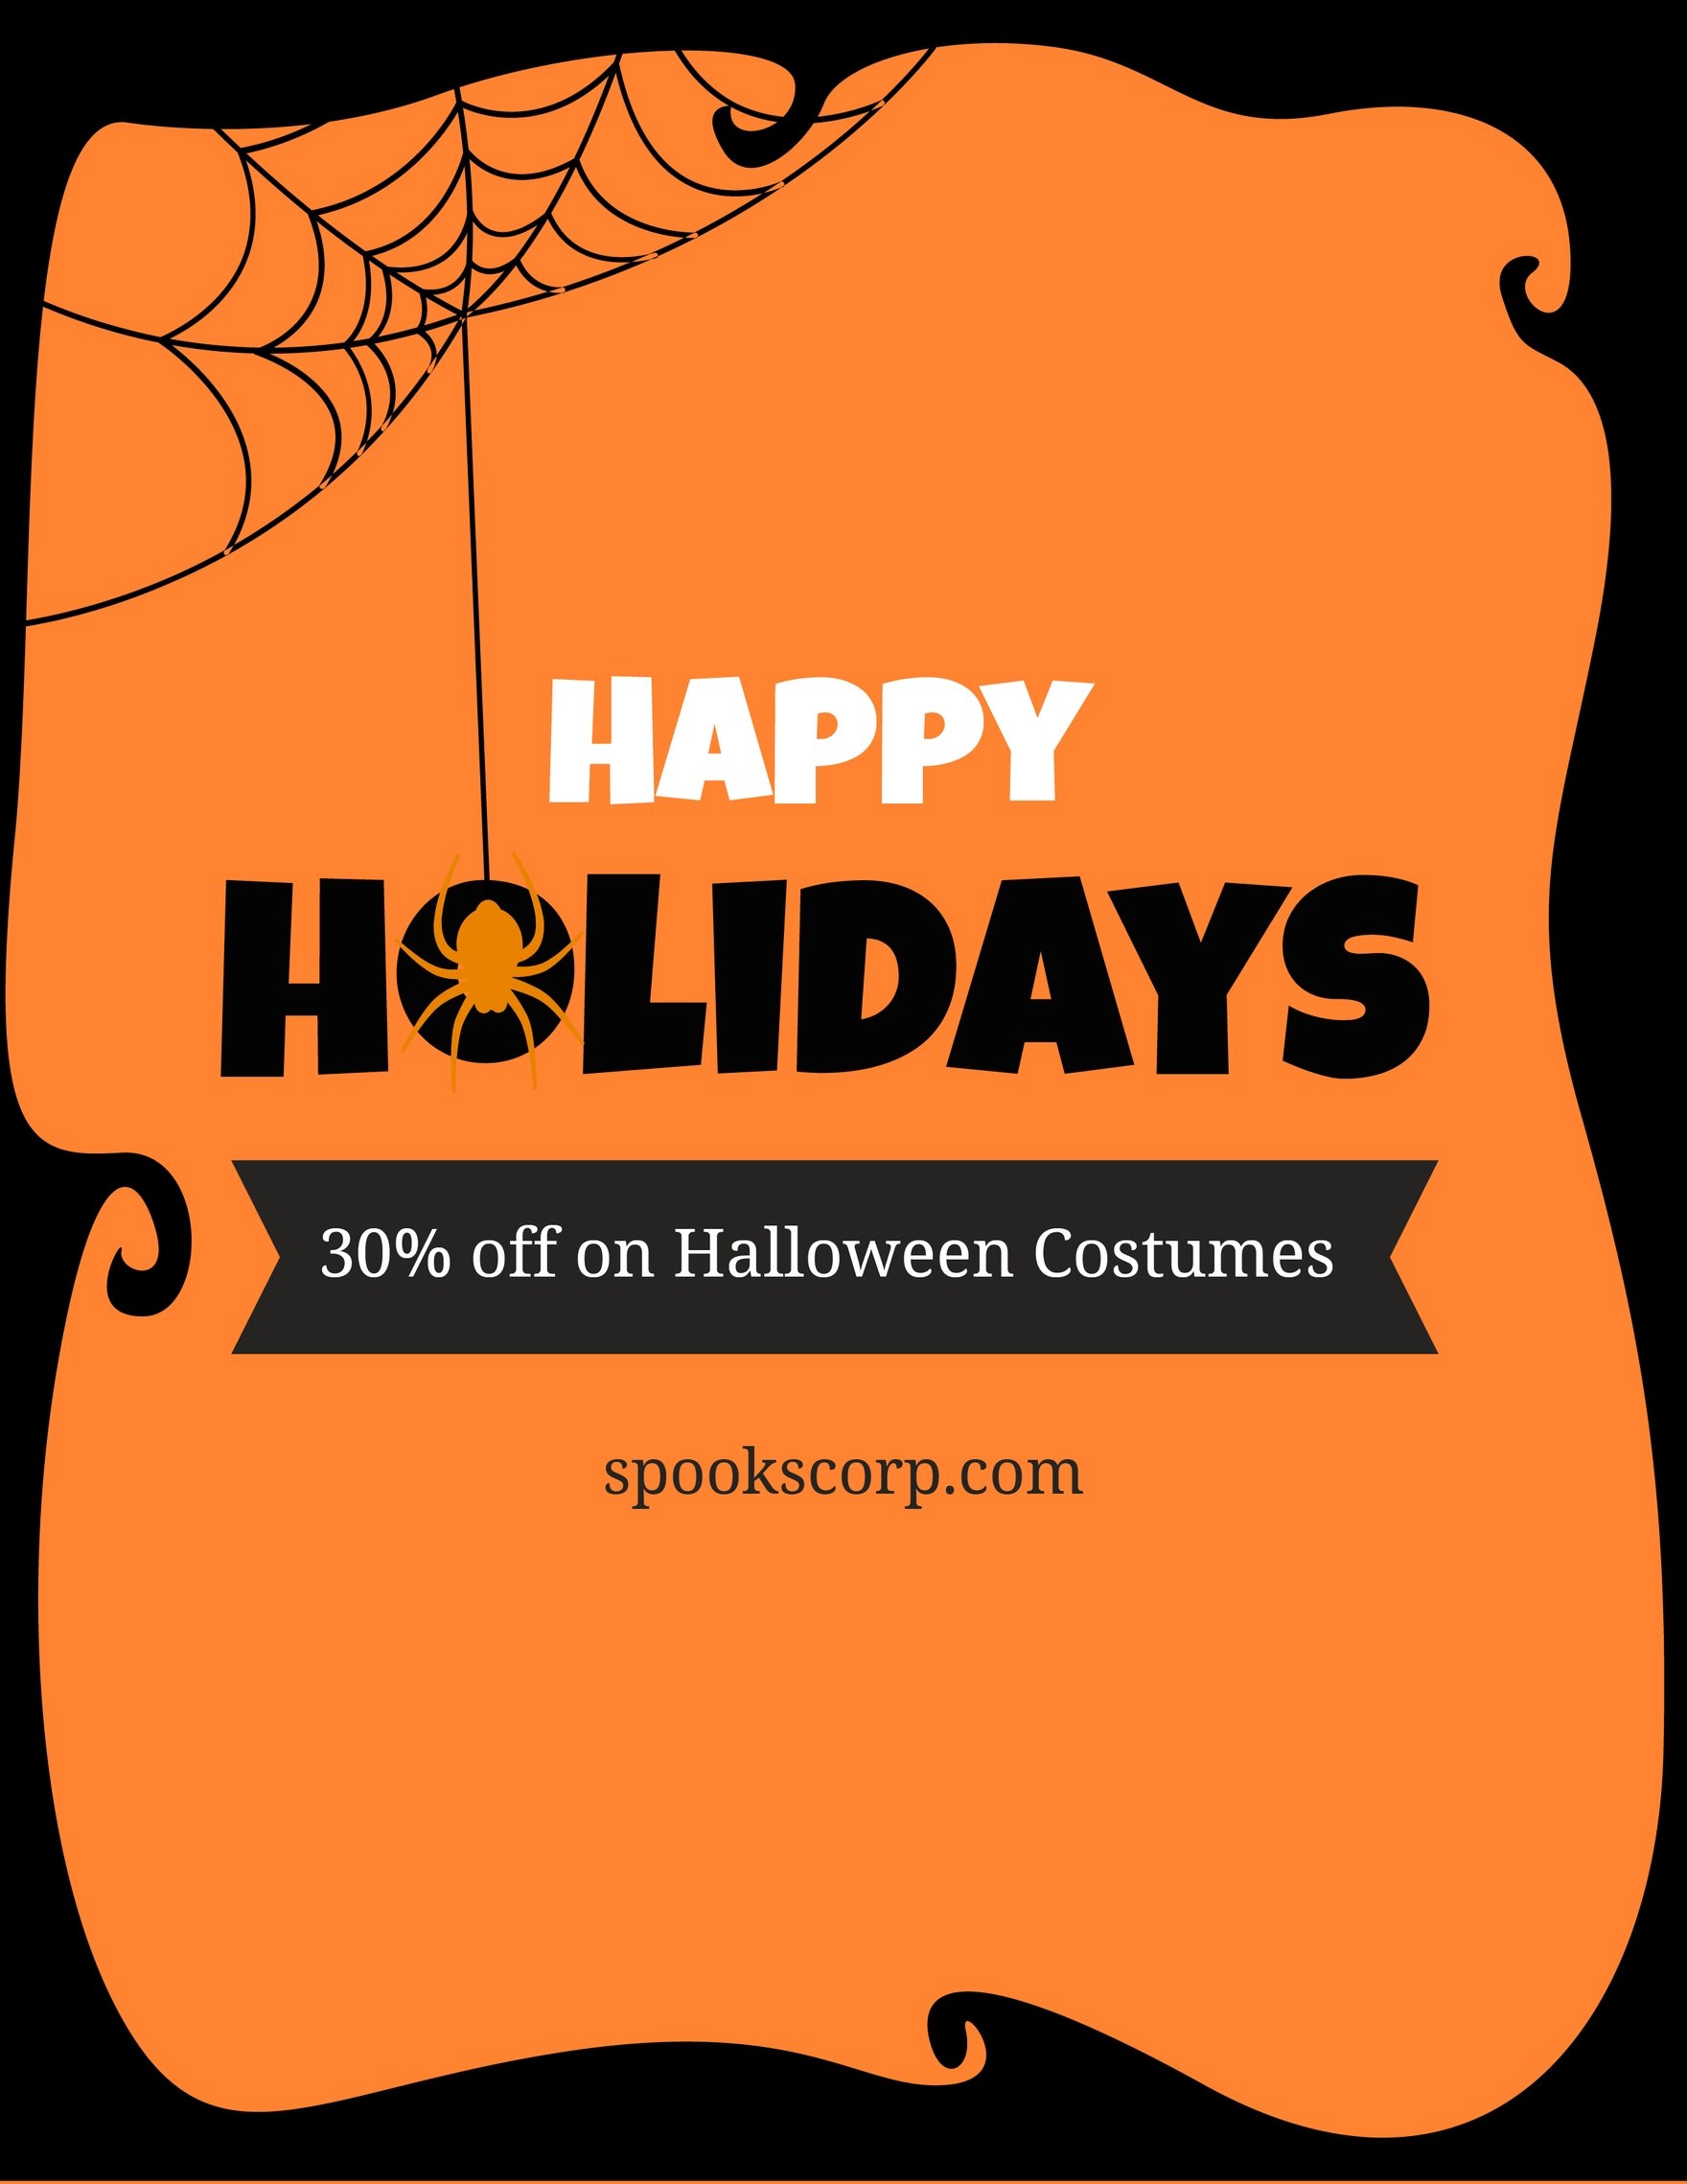 Free Halloween Advertising Flyer in Word, Google Docs, Illustrator, PSD, Apple Pages, Publisher, EPS, SVG, JPG, PNG